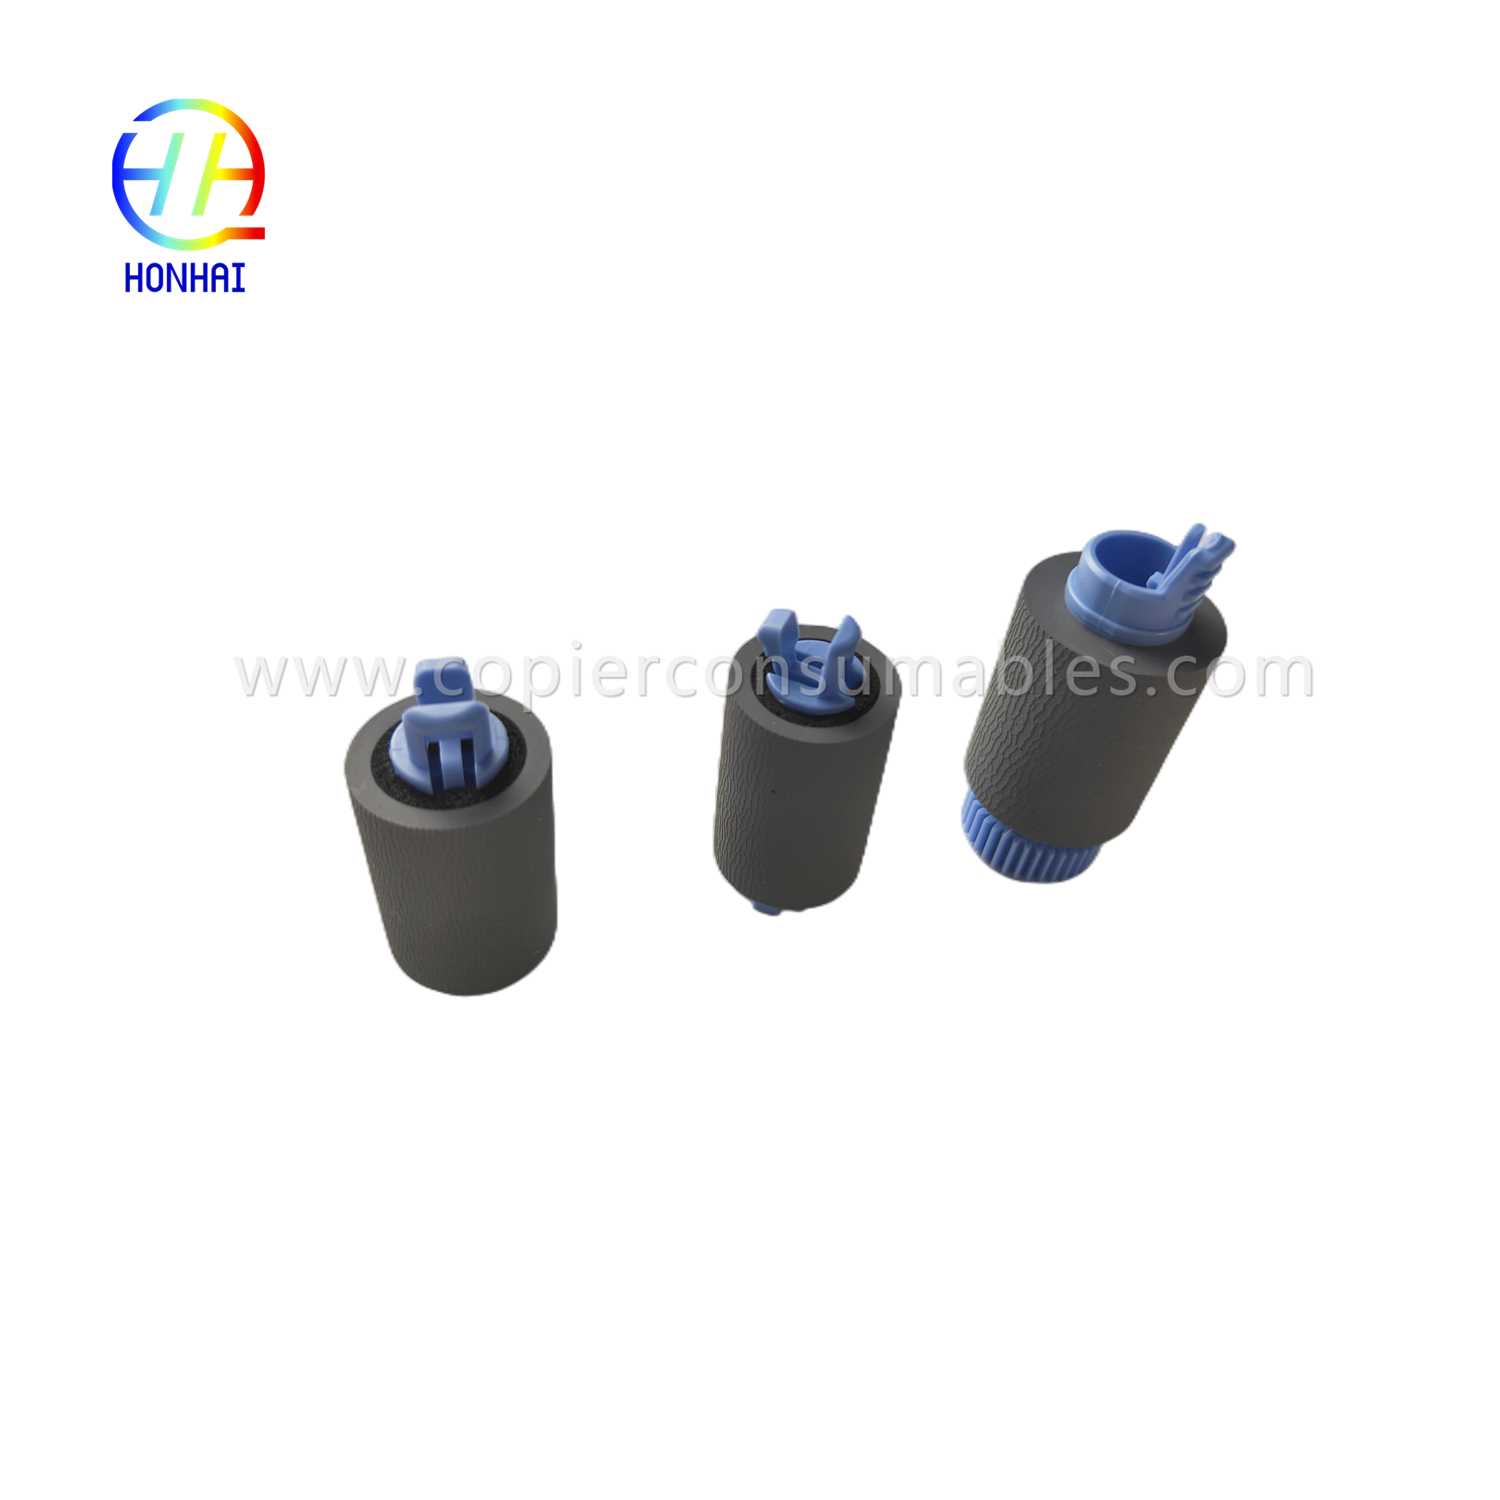 https://www.copierconsumables.com/tray-2-5-pickup-feed-separation-roller-set-for-hp-a7w93-67082-mfp-785f-780dn-e77650z-e77660z-e77650dn-e77660dn-p77740dn- p77750z-p77760z-p75050dn-p75050dw-продукт/